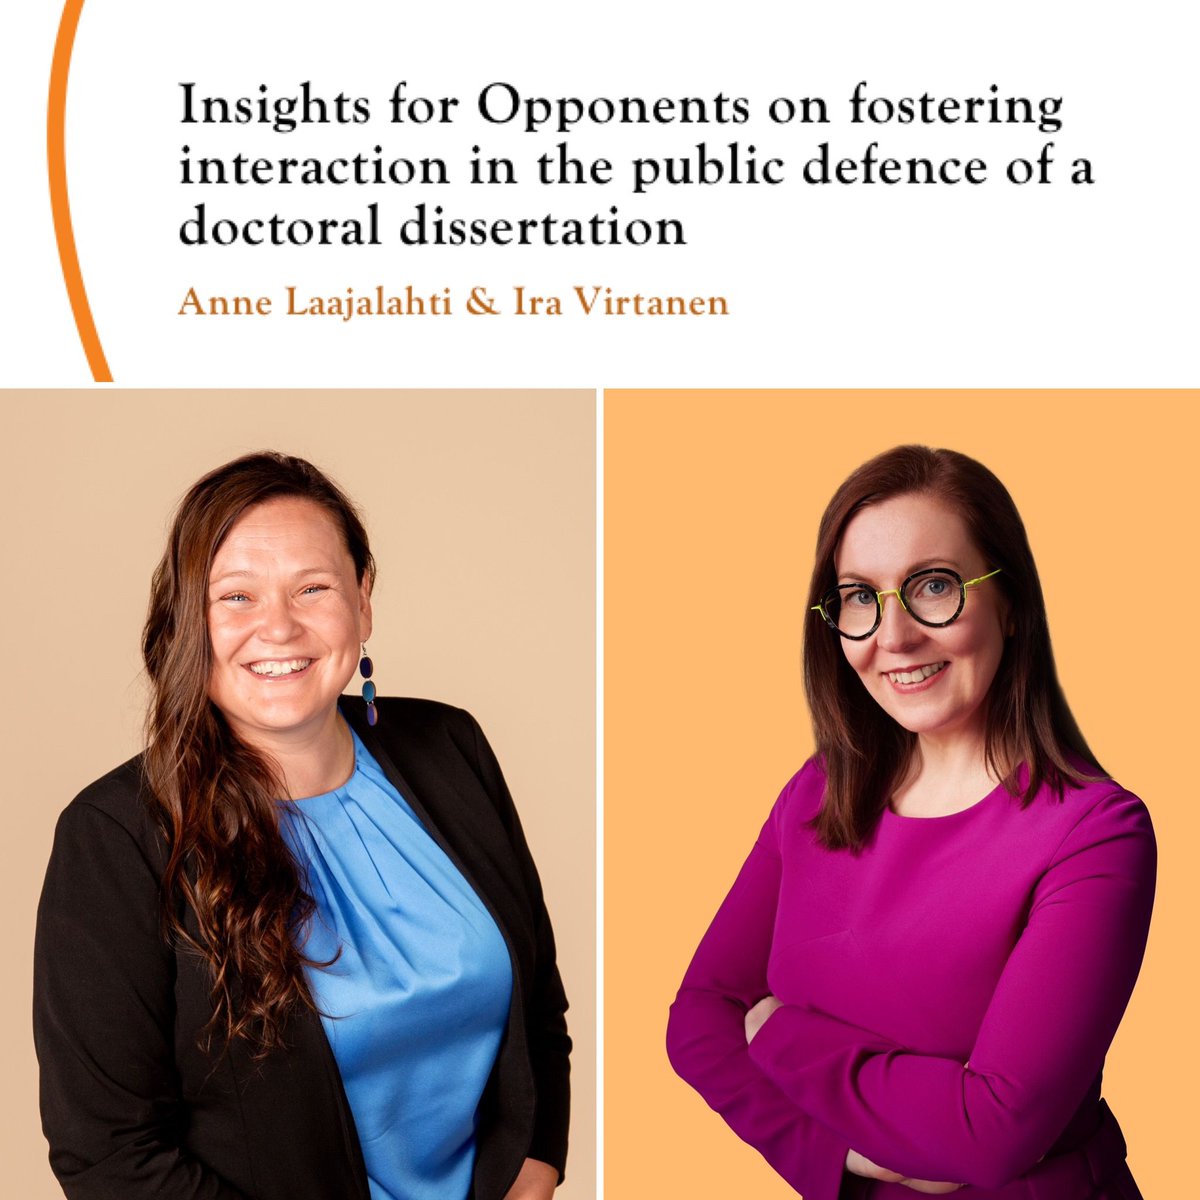 New publication out today! For #opponent @AnneLaajalahti & @IraVirtanen (2024). Insights for Opponents on fostering interaction in the public defence of a doctoral dissertation. Prologi – Journal of Communication and Social Interaction, 20(2), forthcoming. doi.org/10.33352/prlg.…